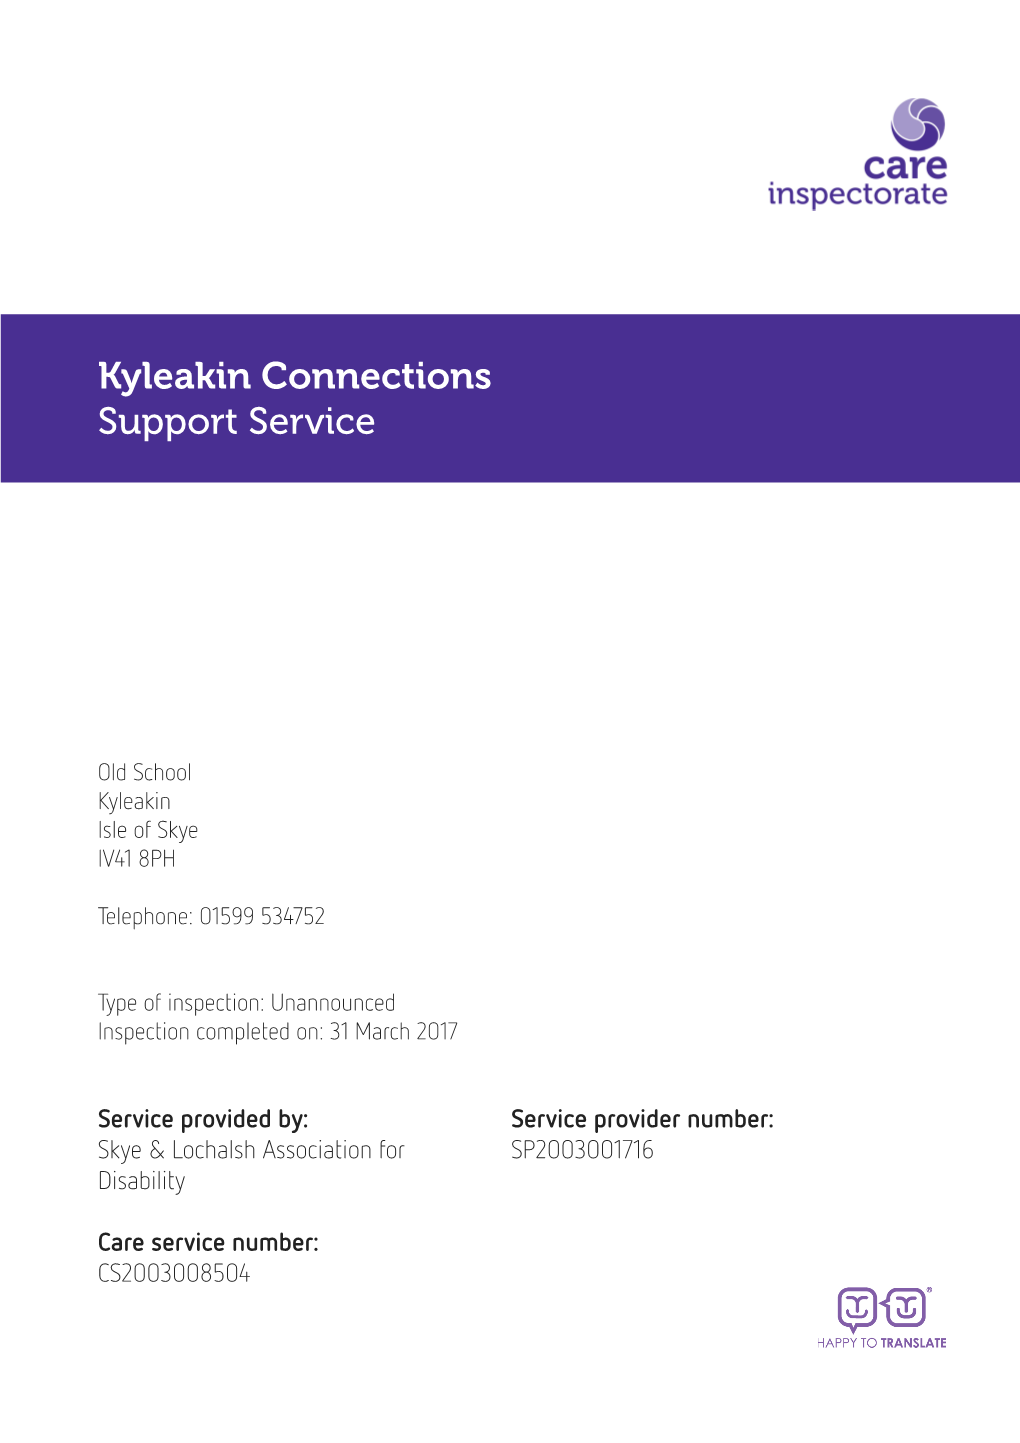 Kyleakin Connections Support Service